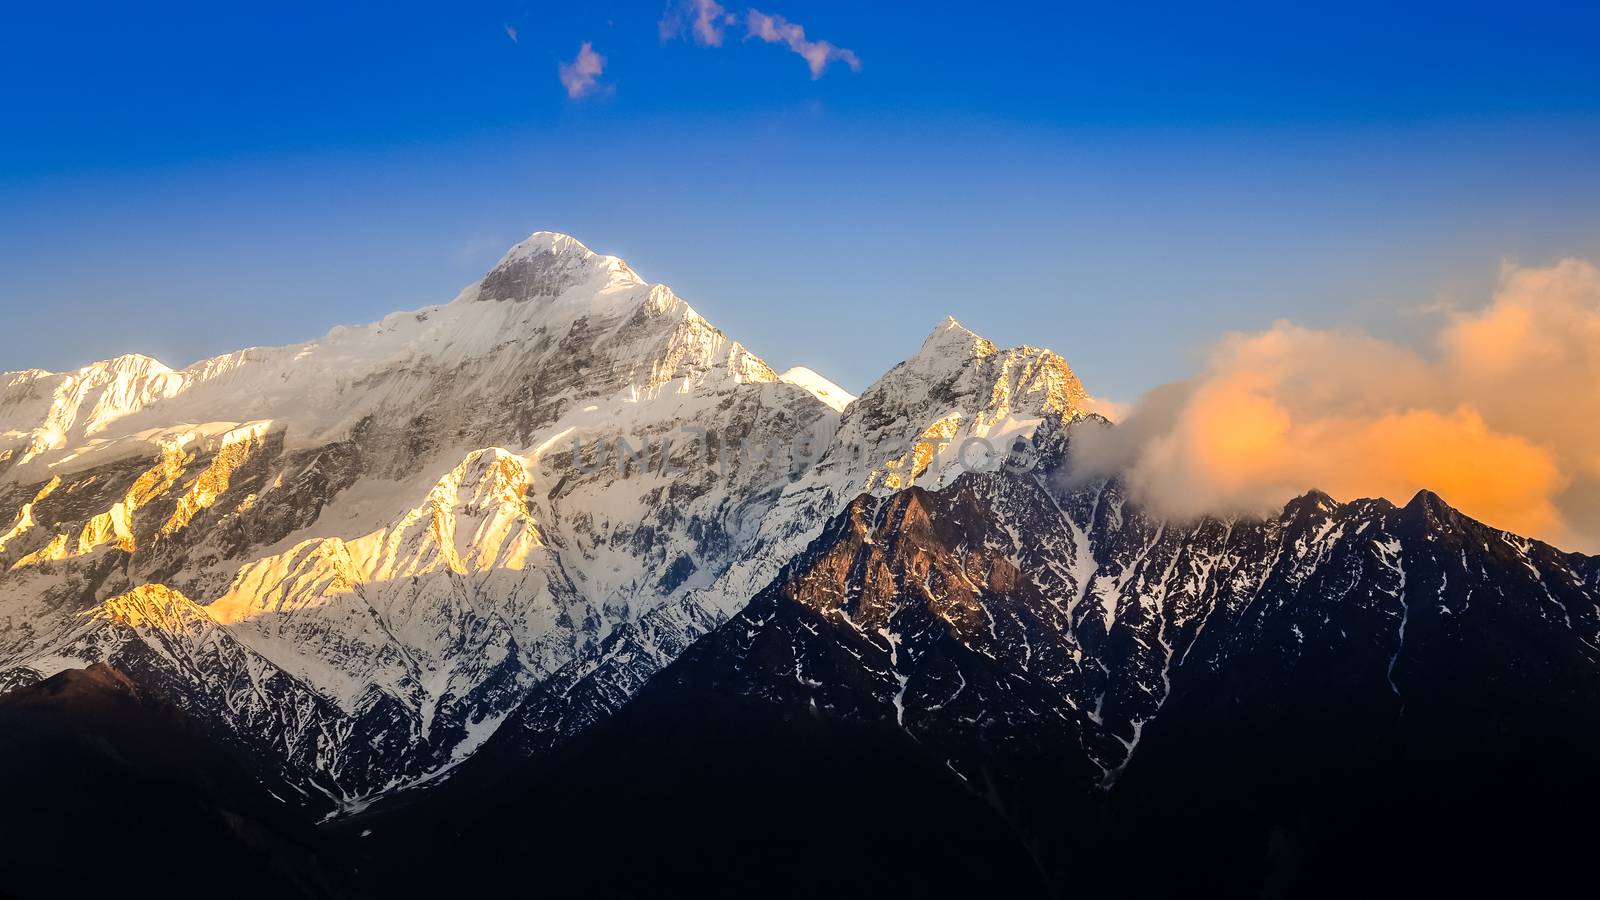 Scenic view of Himalayas mountains at sunset, Annapurna area, Nepal